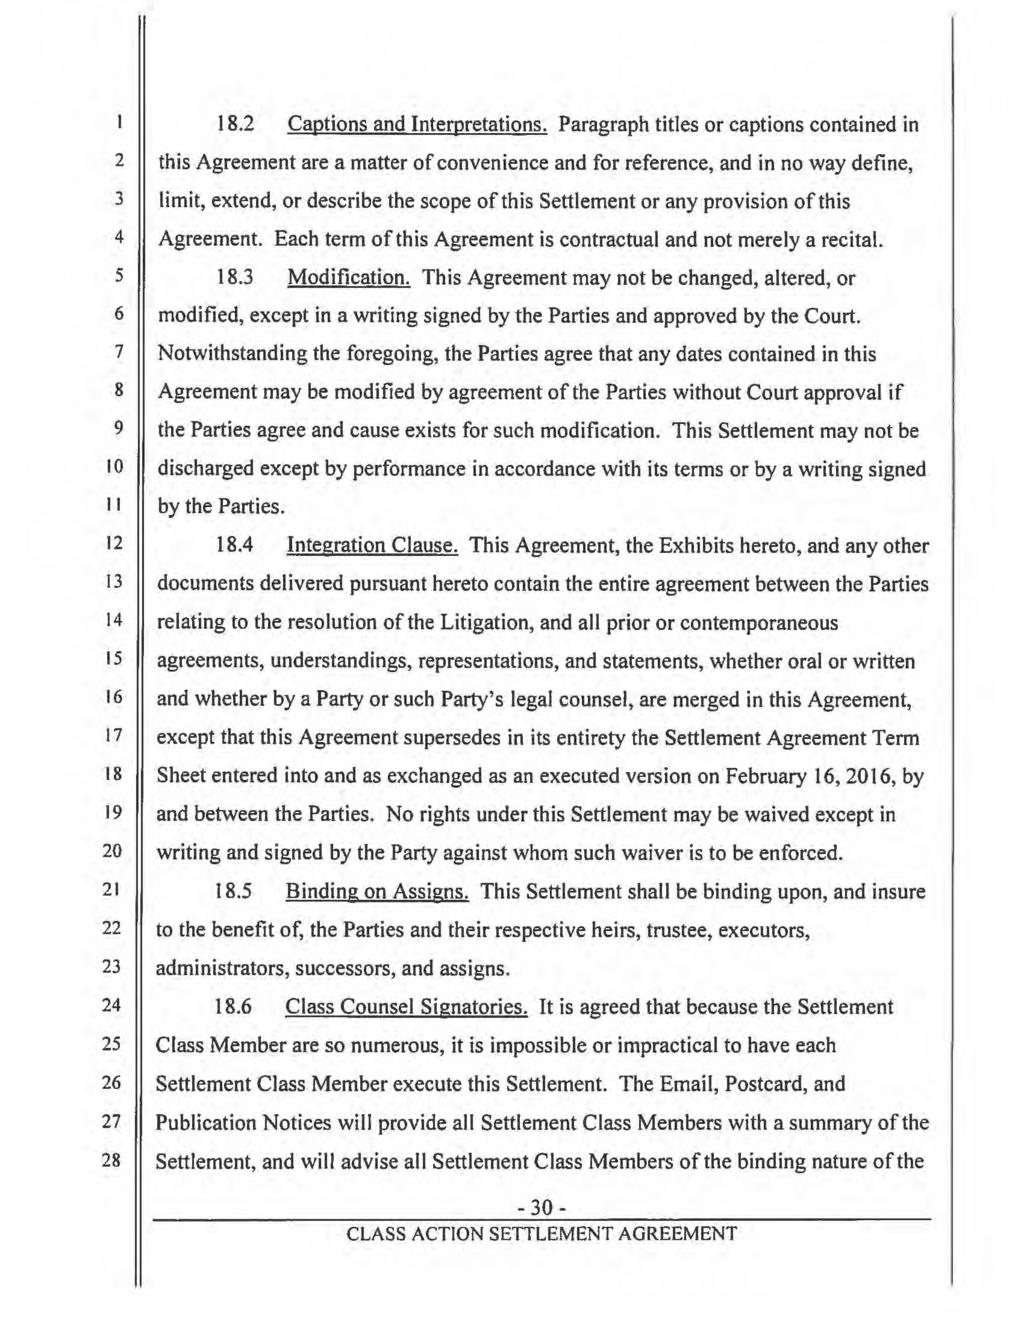 Case 5:15-cv-01143-RGK-SP Document 63-3 Filed 03/14/16 Page 32 of 59 Page ID #:801 18.2 Captions and Interpretations.